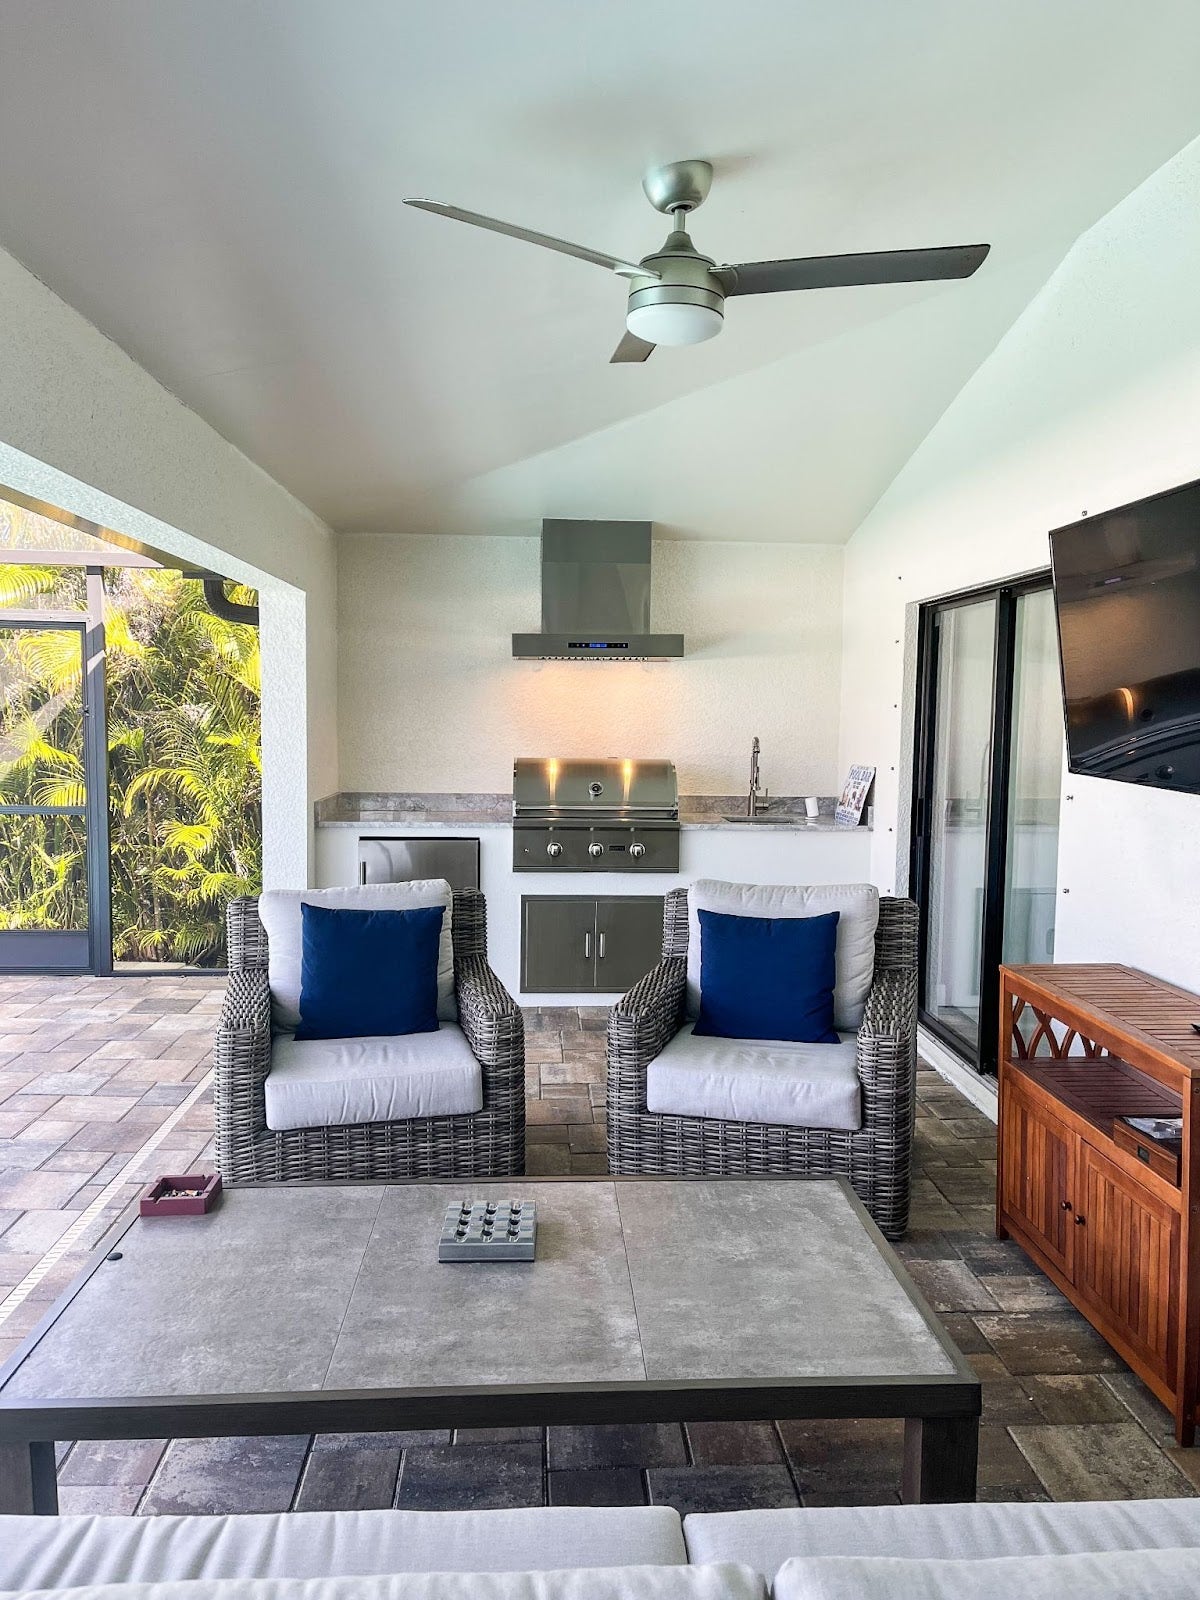 Relaxed Patio for Entertaining: Comfy seating and screened area create a cozy vibe in this outdoor patio. Modern Proline hood vent complements the stainless steel grill for a stylish touch. Perfect for enjoying long summer evenings with friends - Proline Range Hoods - prolinerangehoods.com 